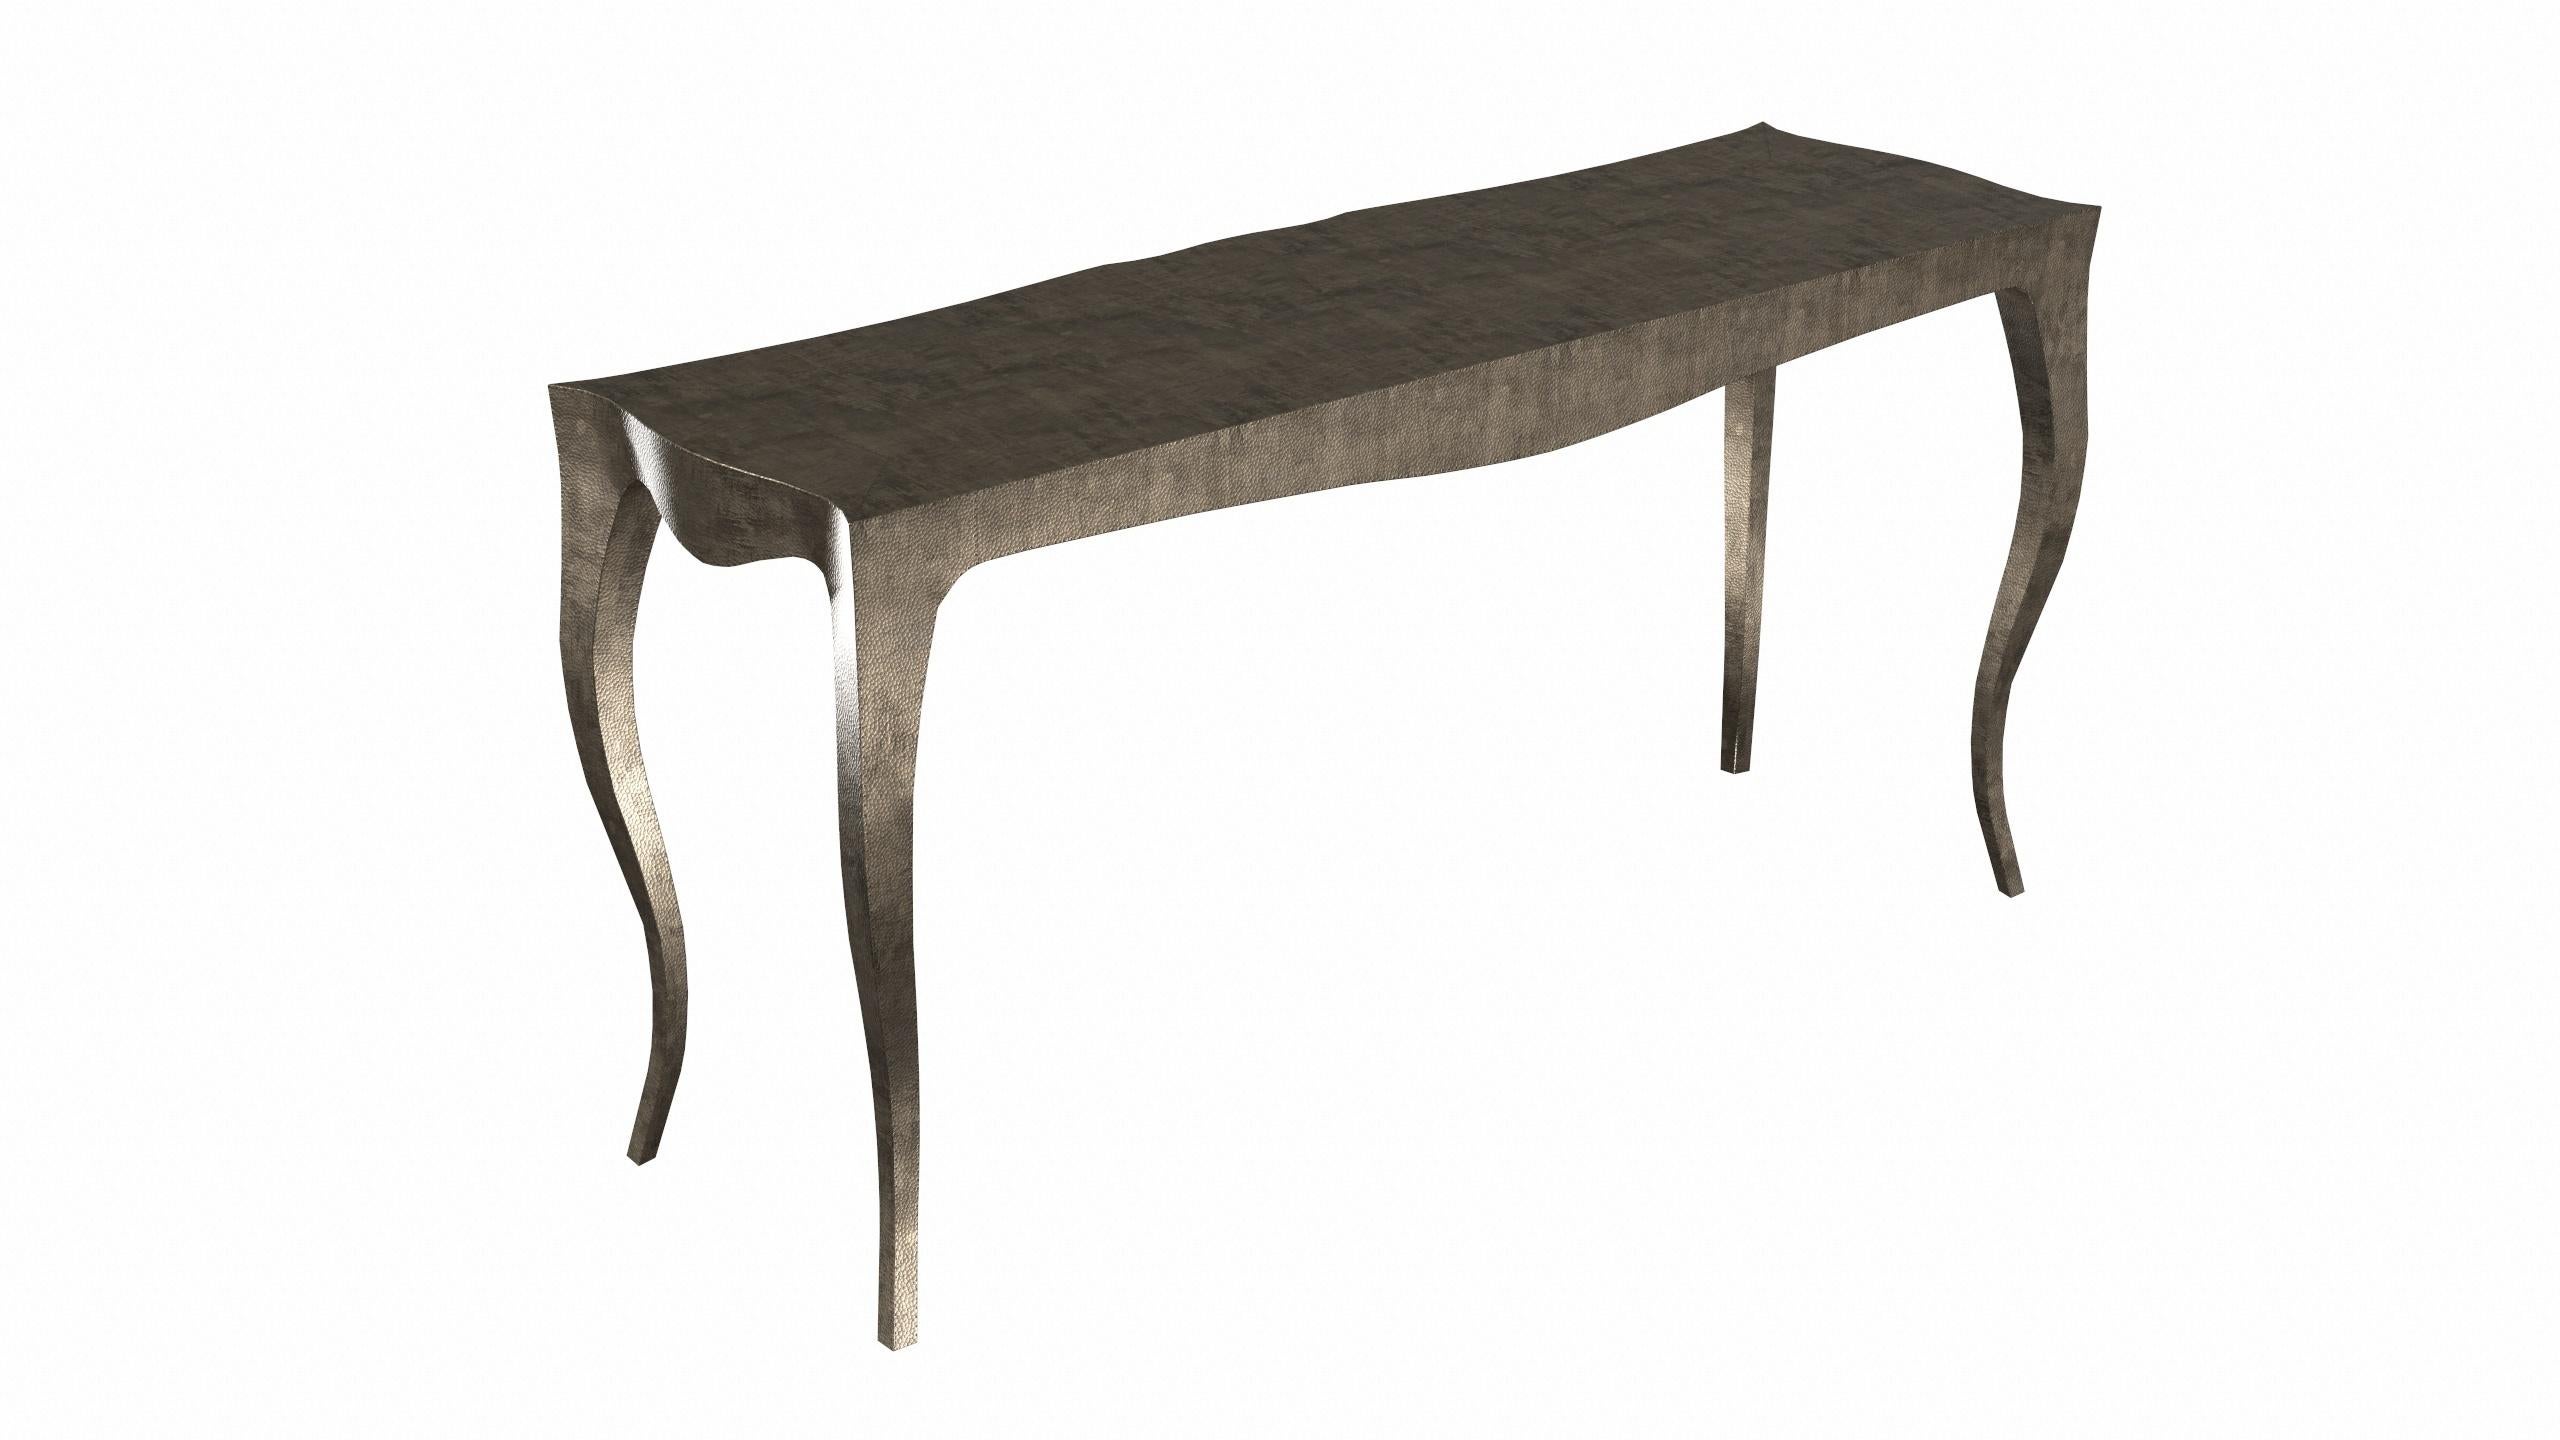 Metal Louise Console Art Deco Industrial and Work Tables Mid. Hammered Antique Bronze For Sale